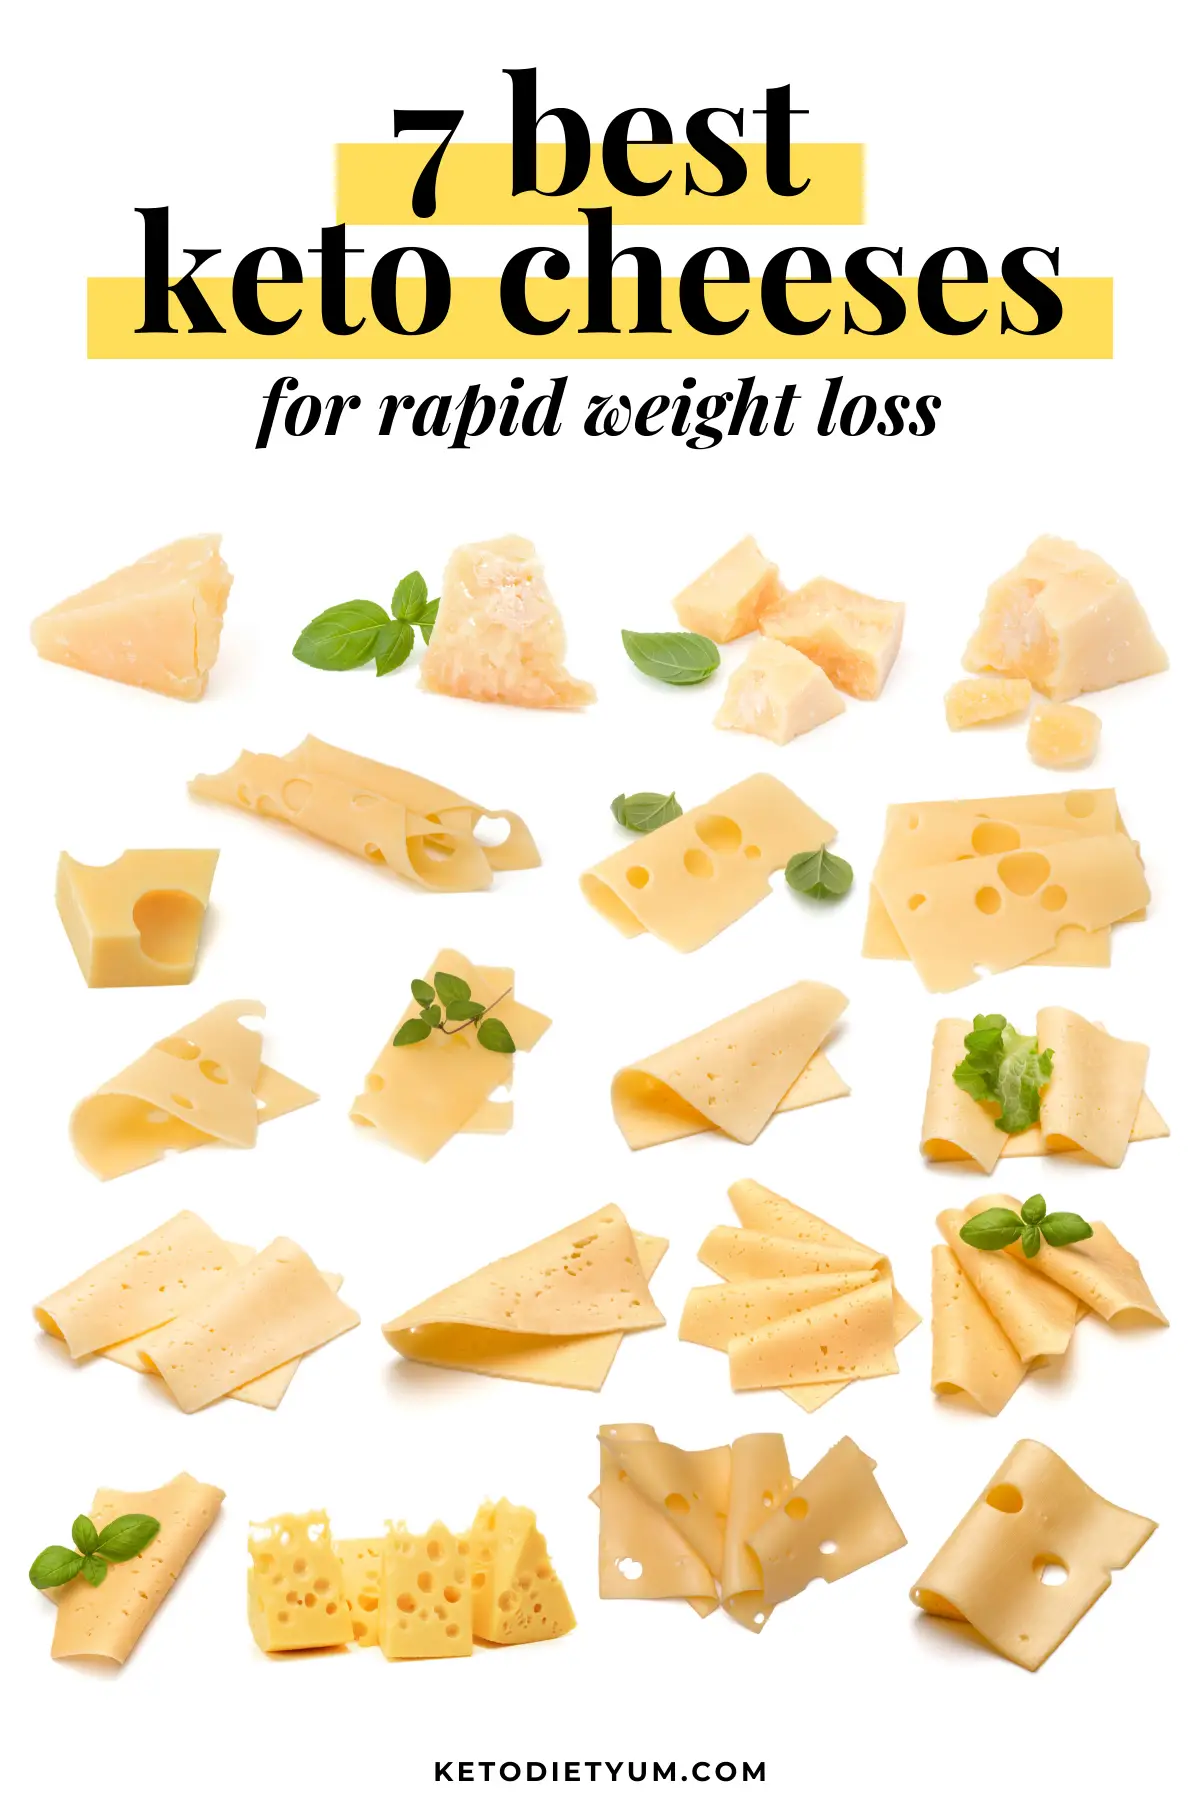 Can You Eat Cheese As A Snack On Keto